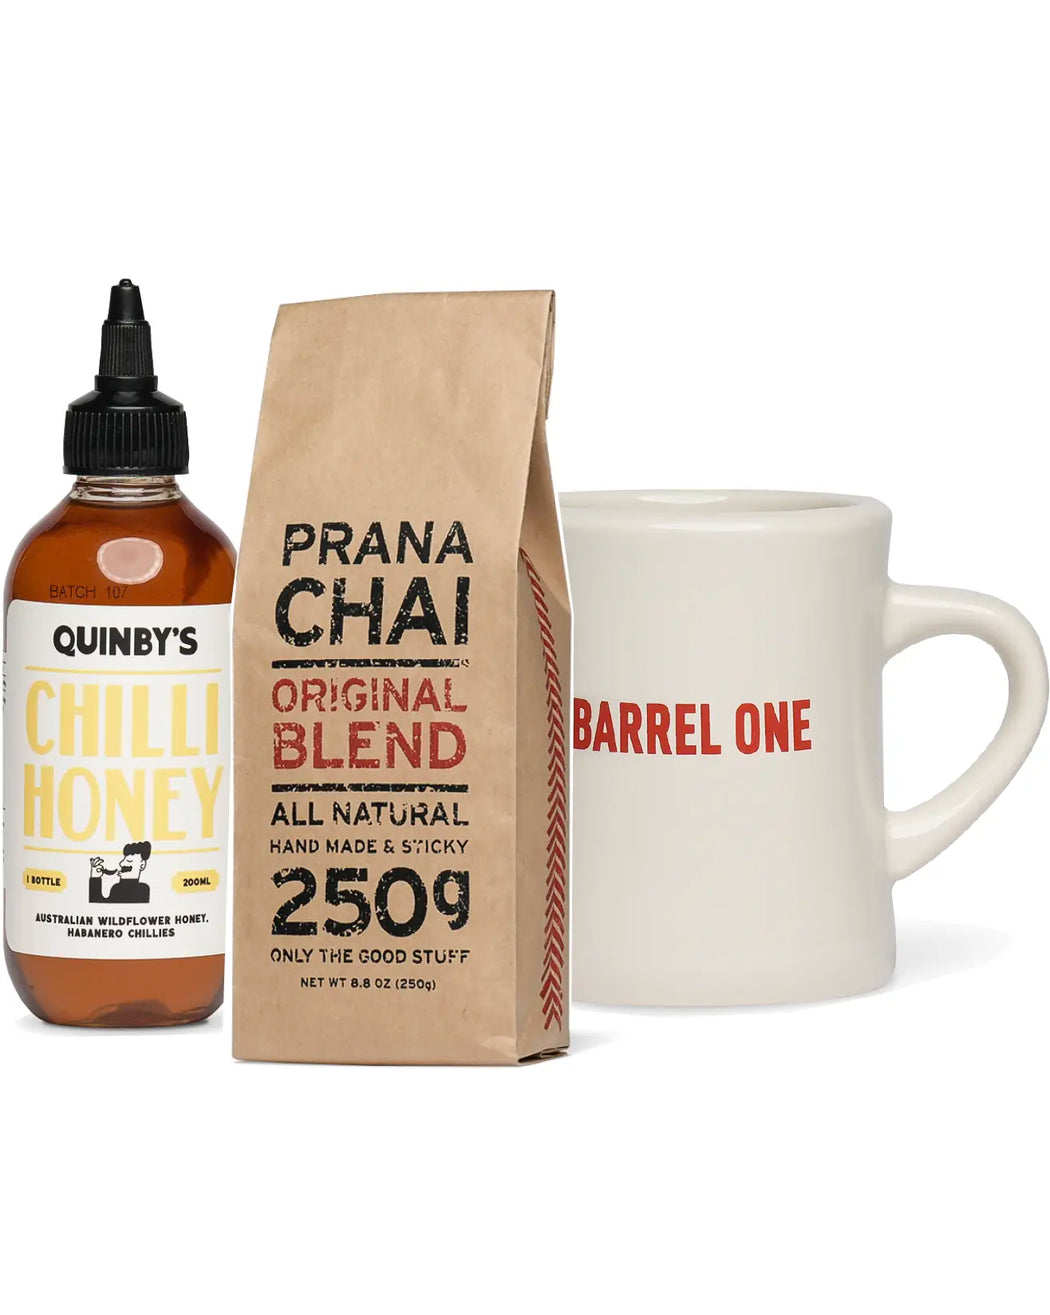 Barrel One Sweet Tooth Giftbox Selection. Includes, A coffe mug, a bottle of Quinby's honey and a 250g bag of prana chai